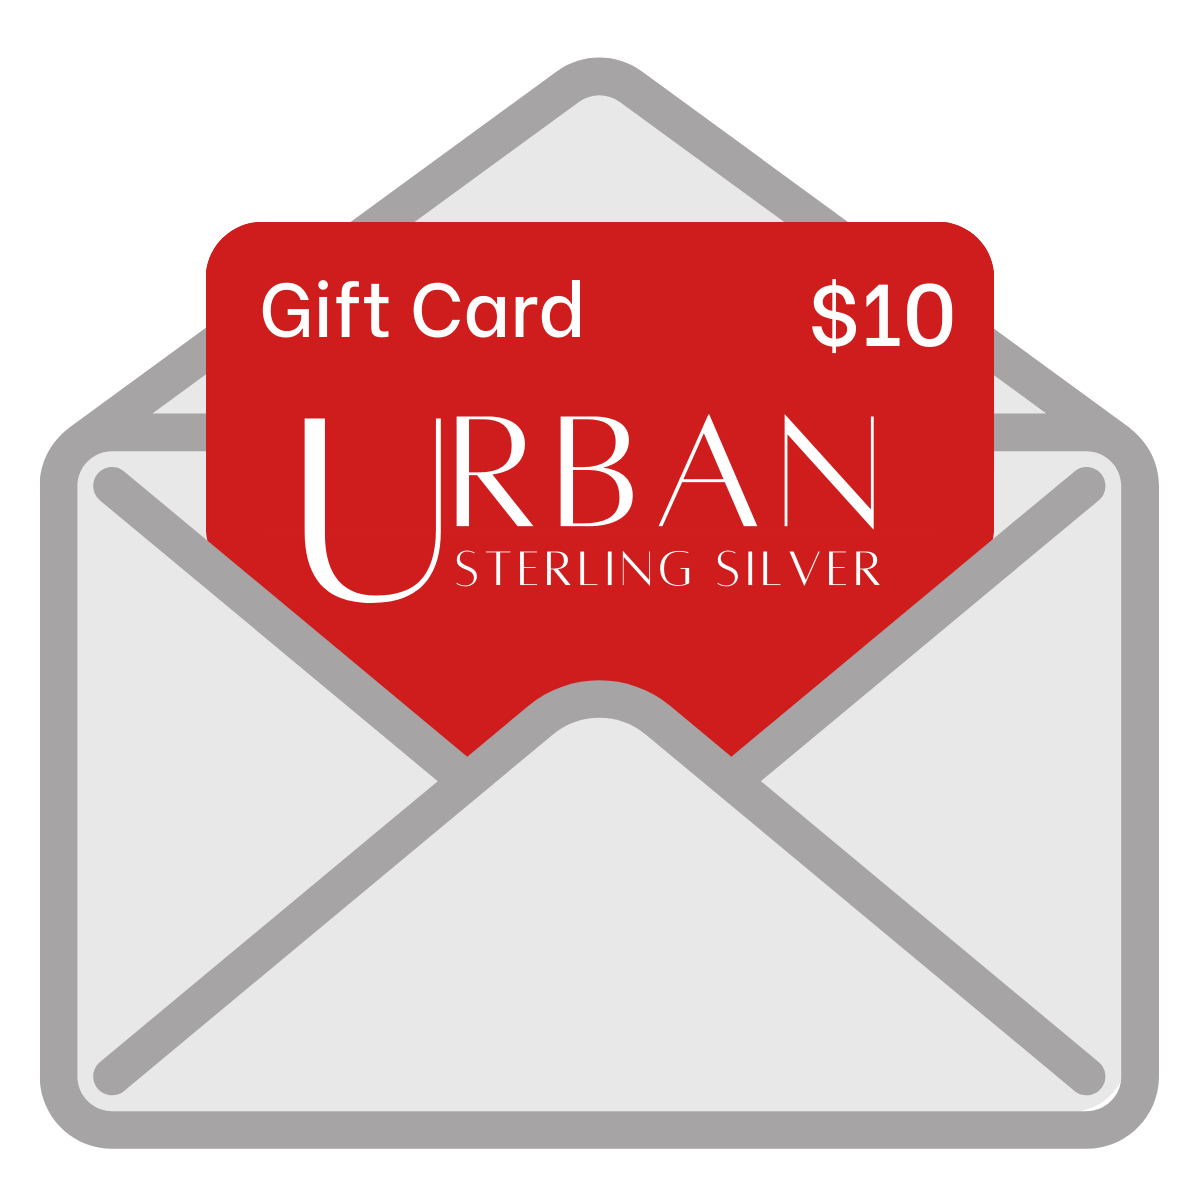 URBAN STERLING SILVER GIFT CARD